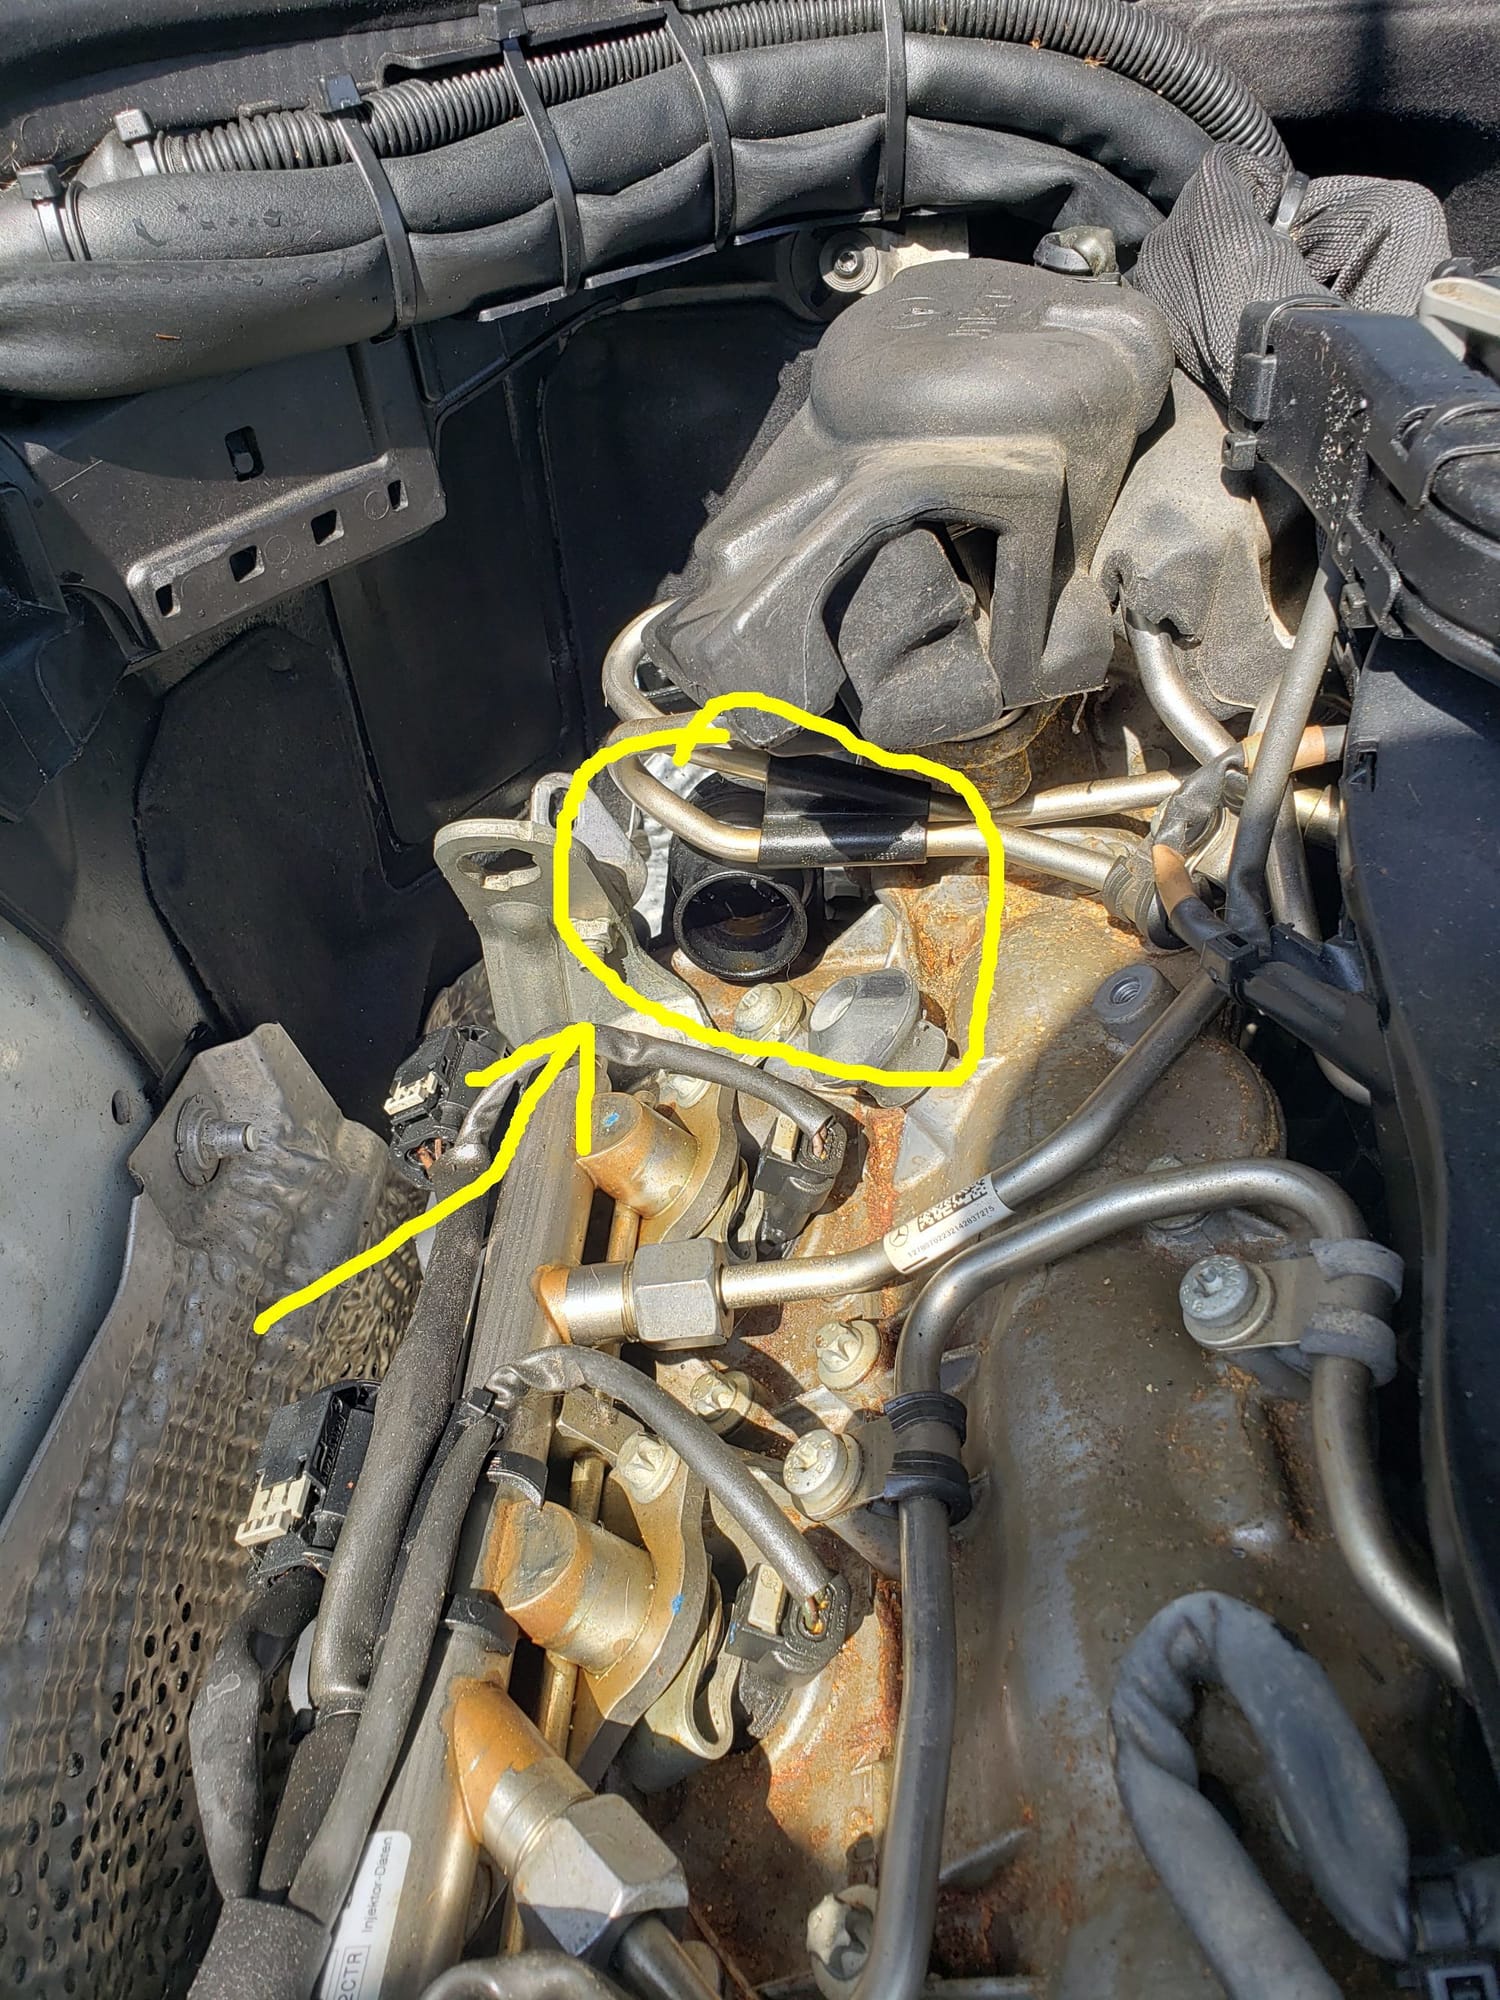 2015 S550 High Oil use plus oil in breather pipe, cause?? -   Forums